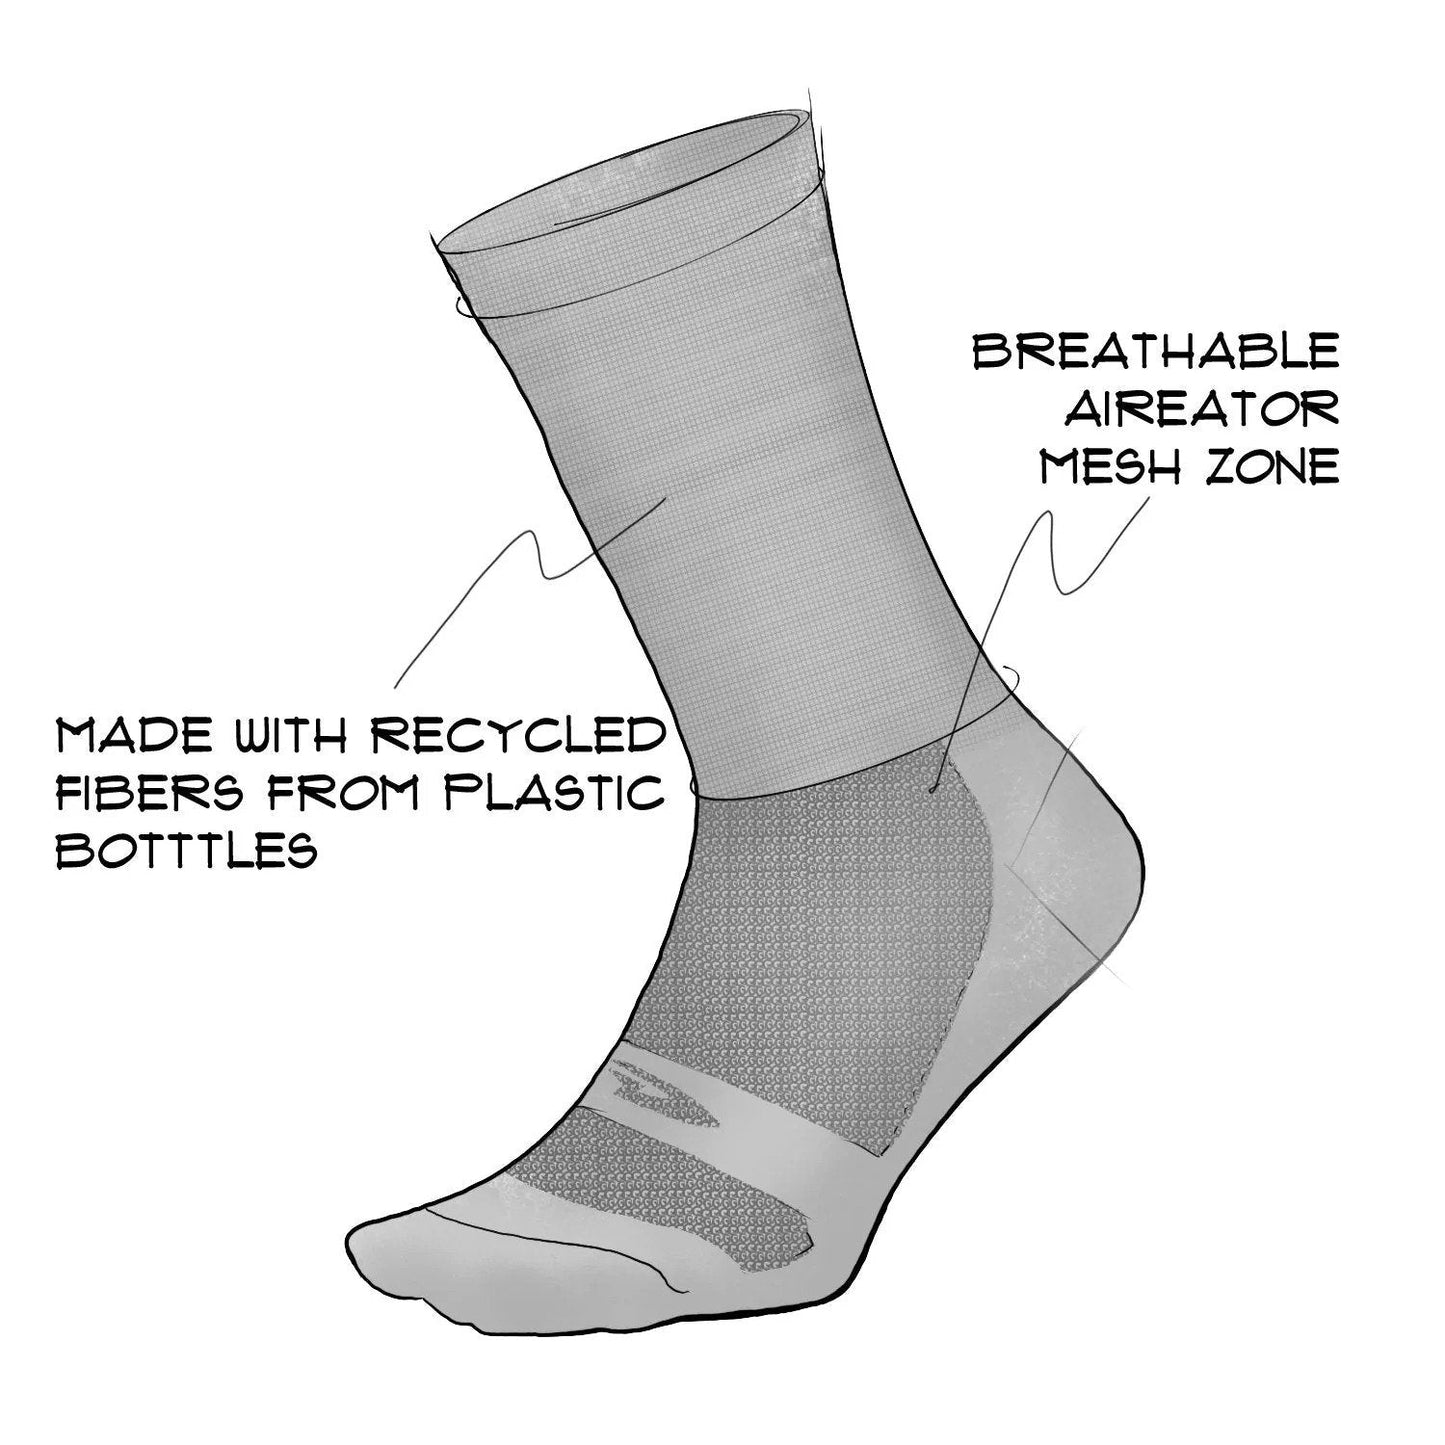 technical drawing of Aireator cycling sock identifying features such as recycled fiber and mesh construction